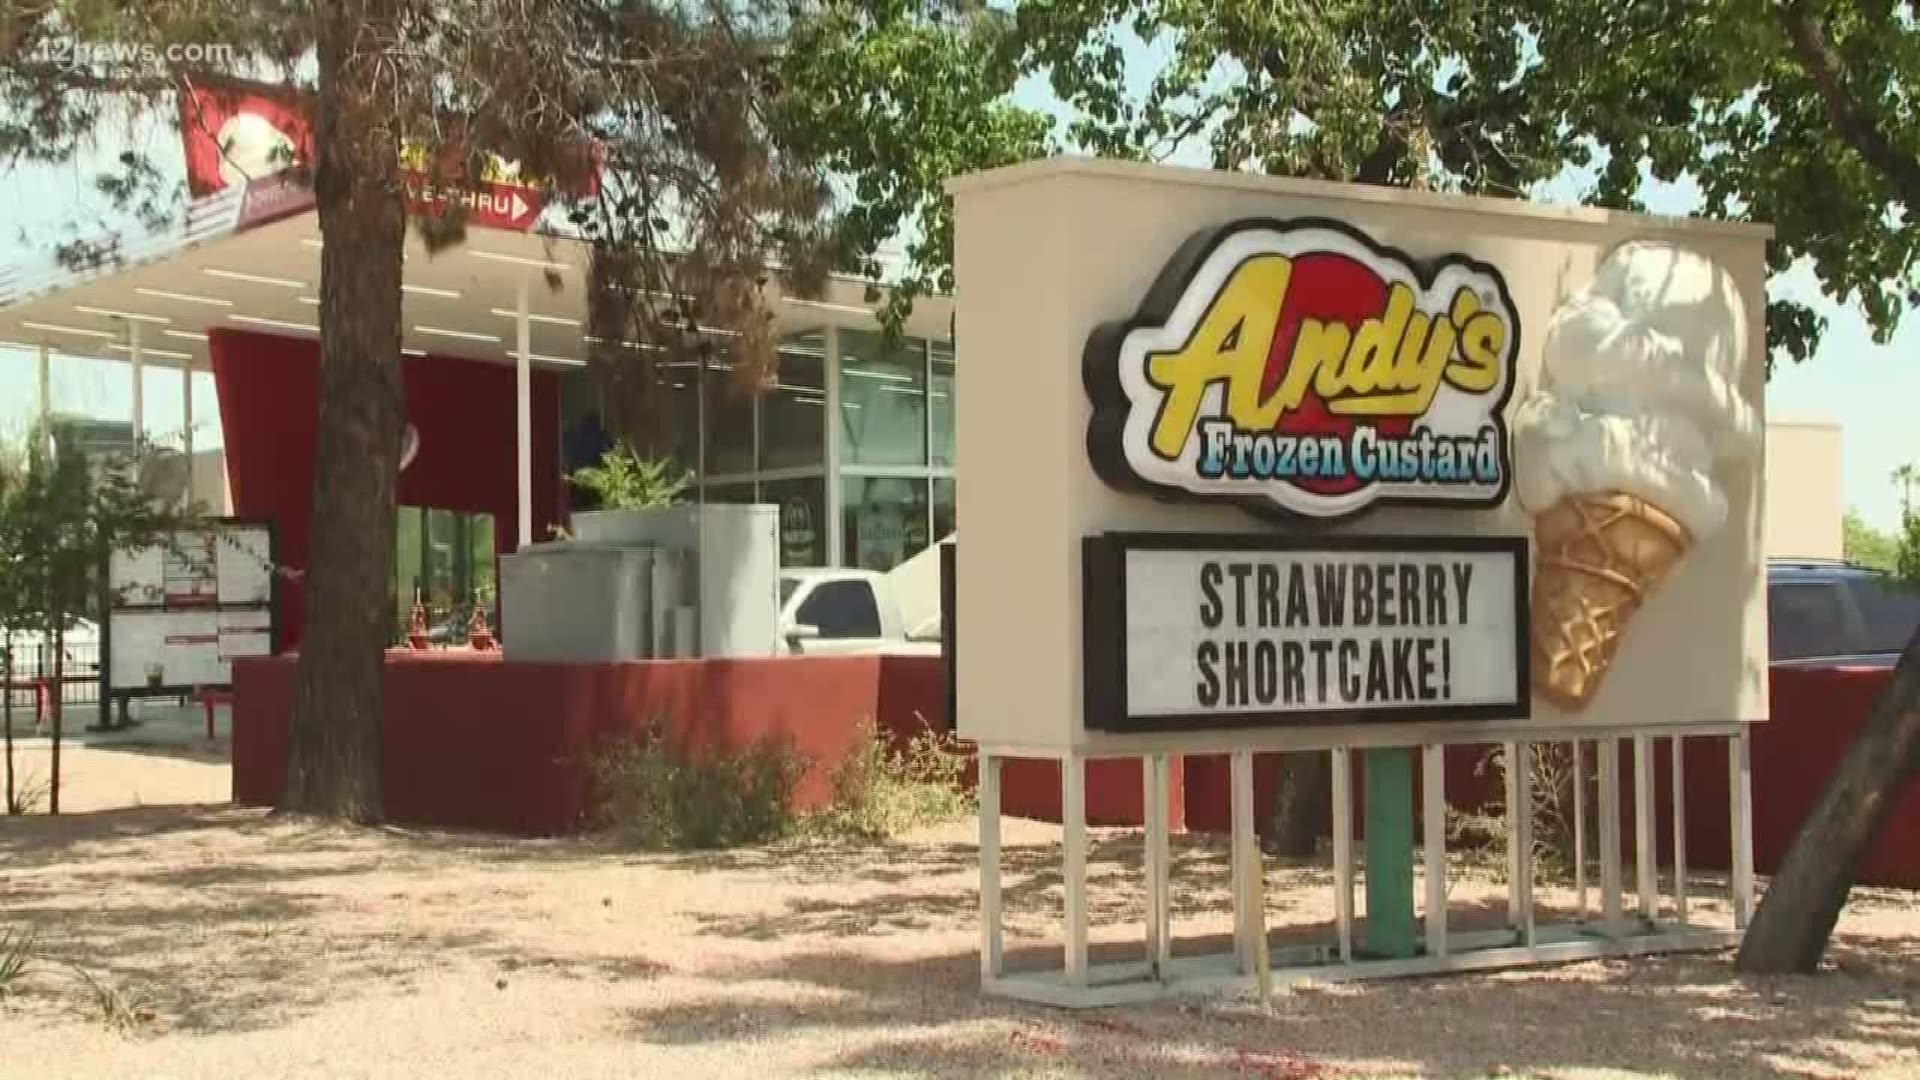 A boy was shot in the head with a B.B. gun pellet while in line at an ice cream shop in Ahwatukee.